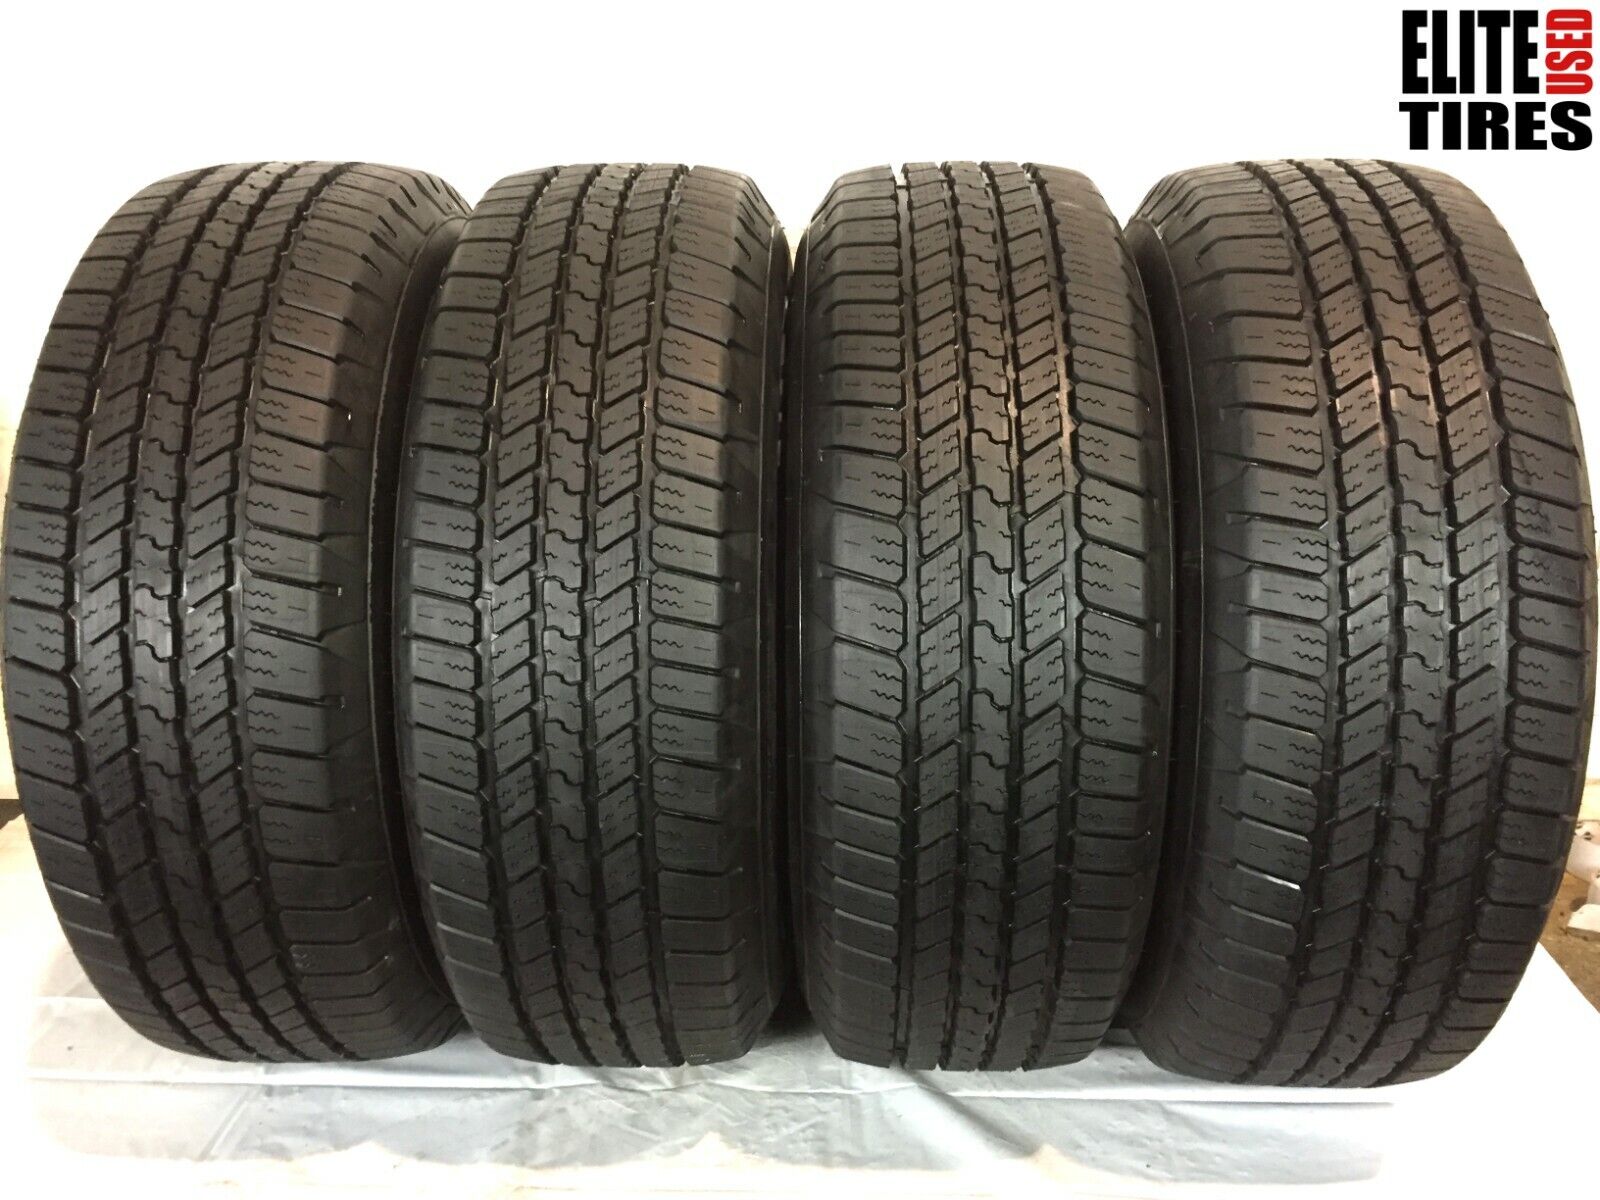 Set of 4 Goodyear Wrangler SR-A Blackwall P265/65R18 265 65 18 Tire -Driven Once